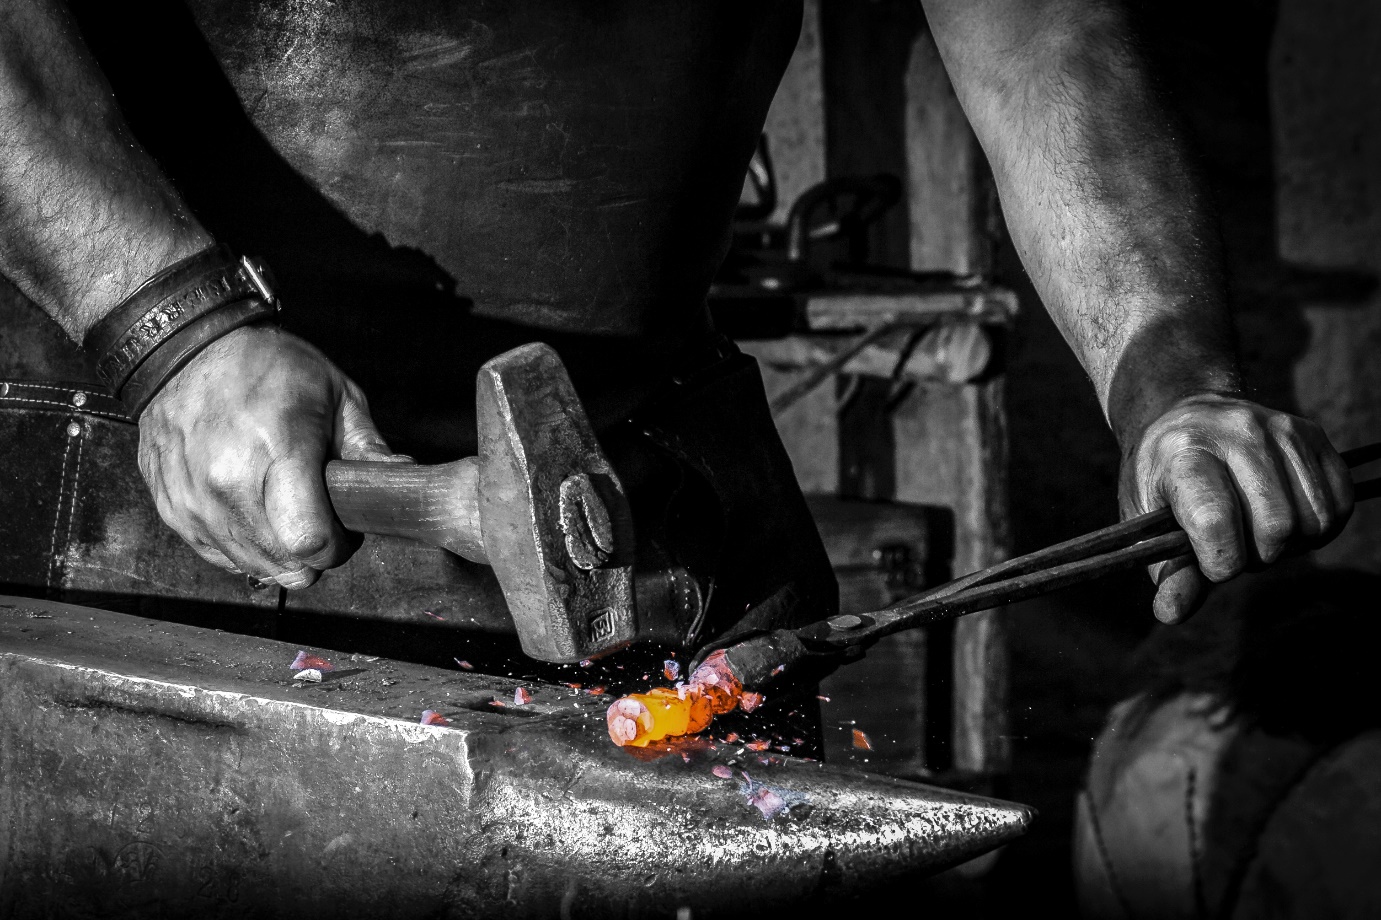 blacksmith working hot metal with a hammer and anvil